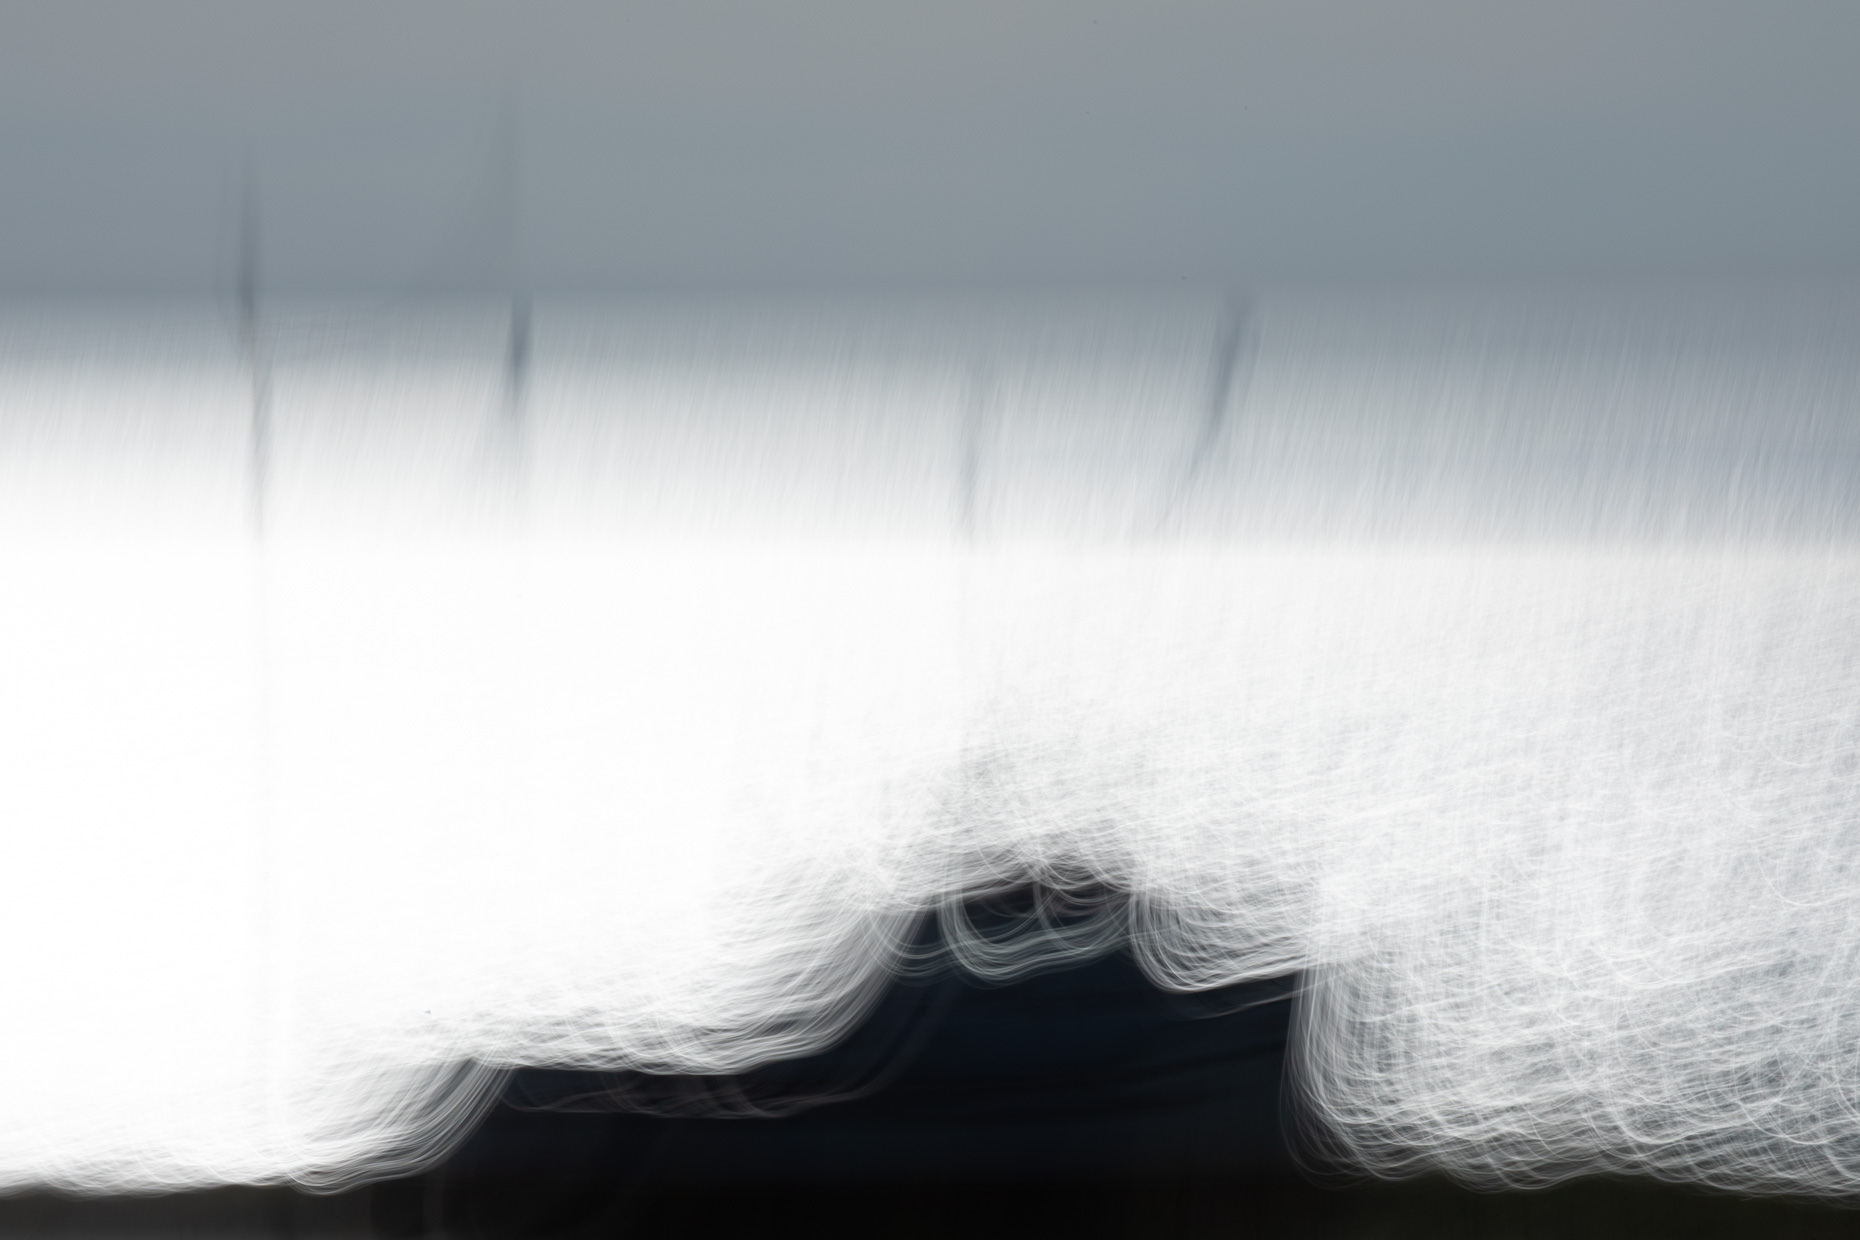 climate_change_winter_ice_Saint_Lawrence_River_Quebec_ICM_intentional_camera_movement-4